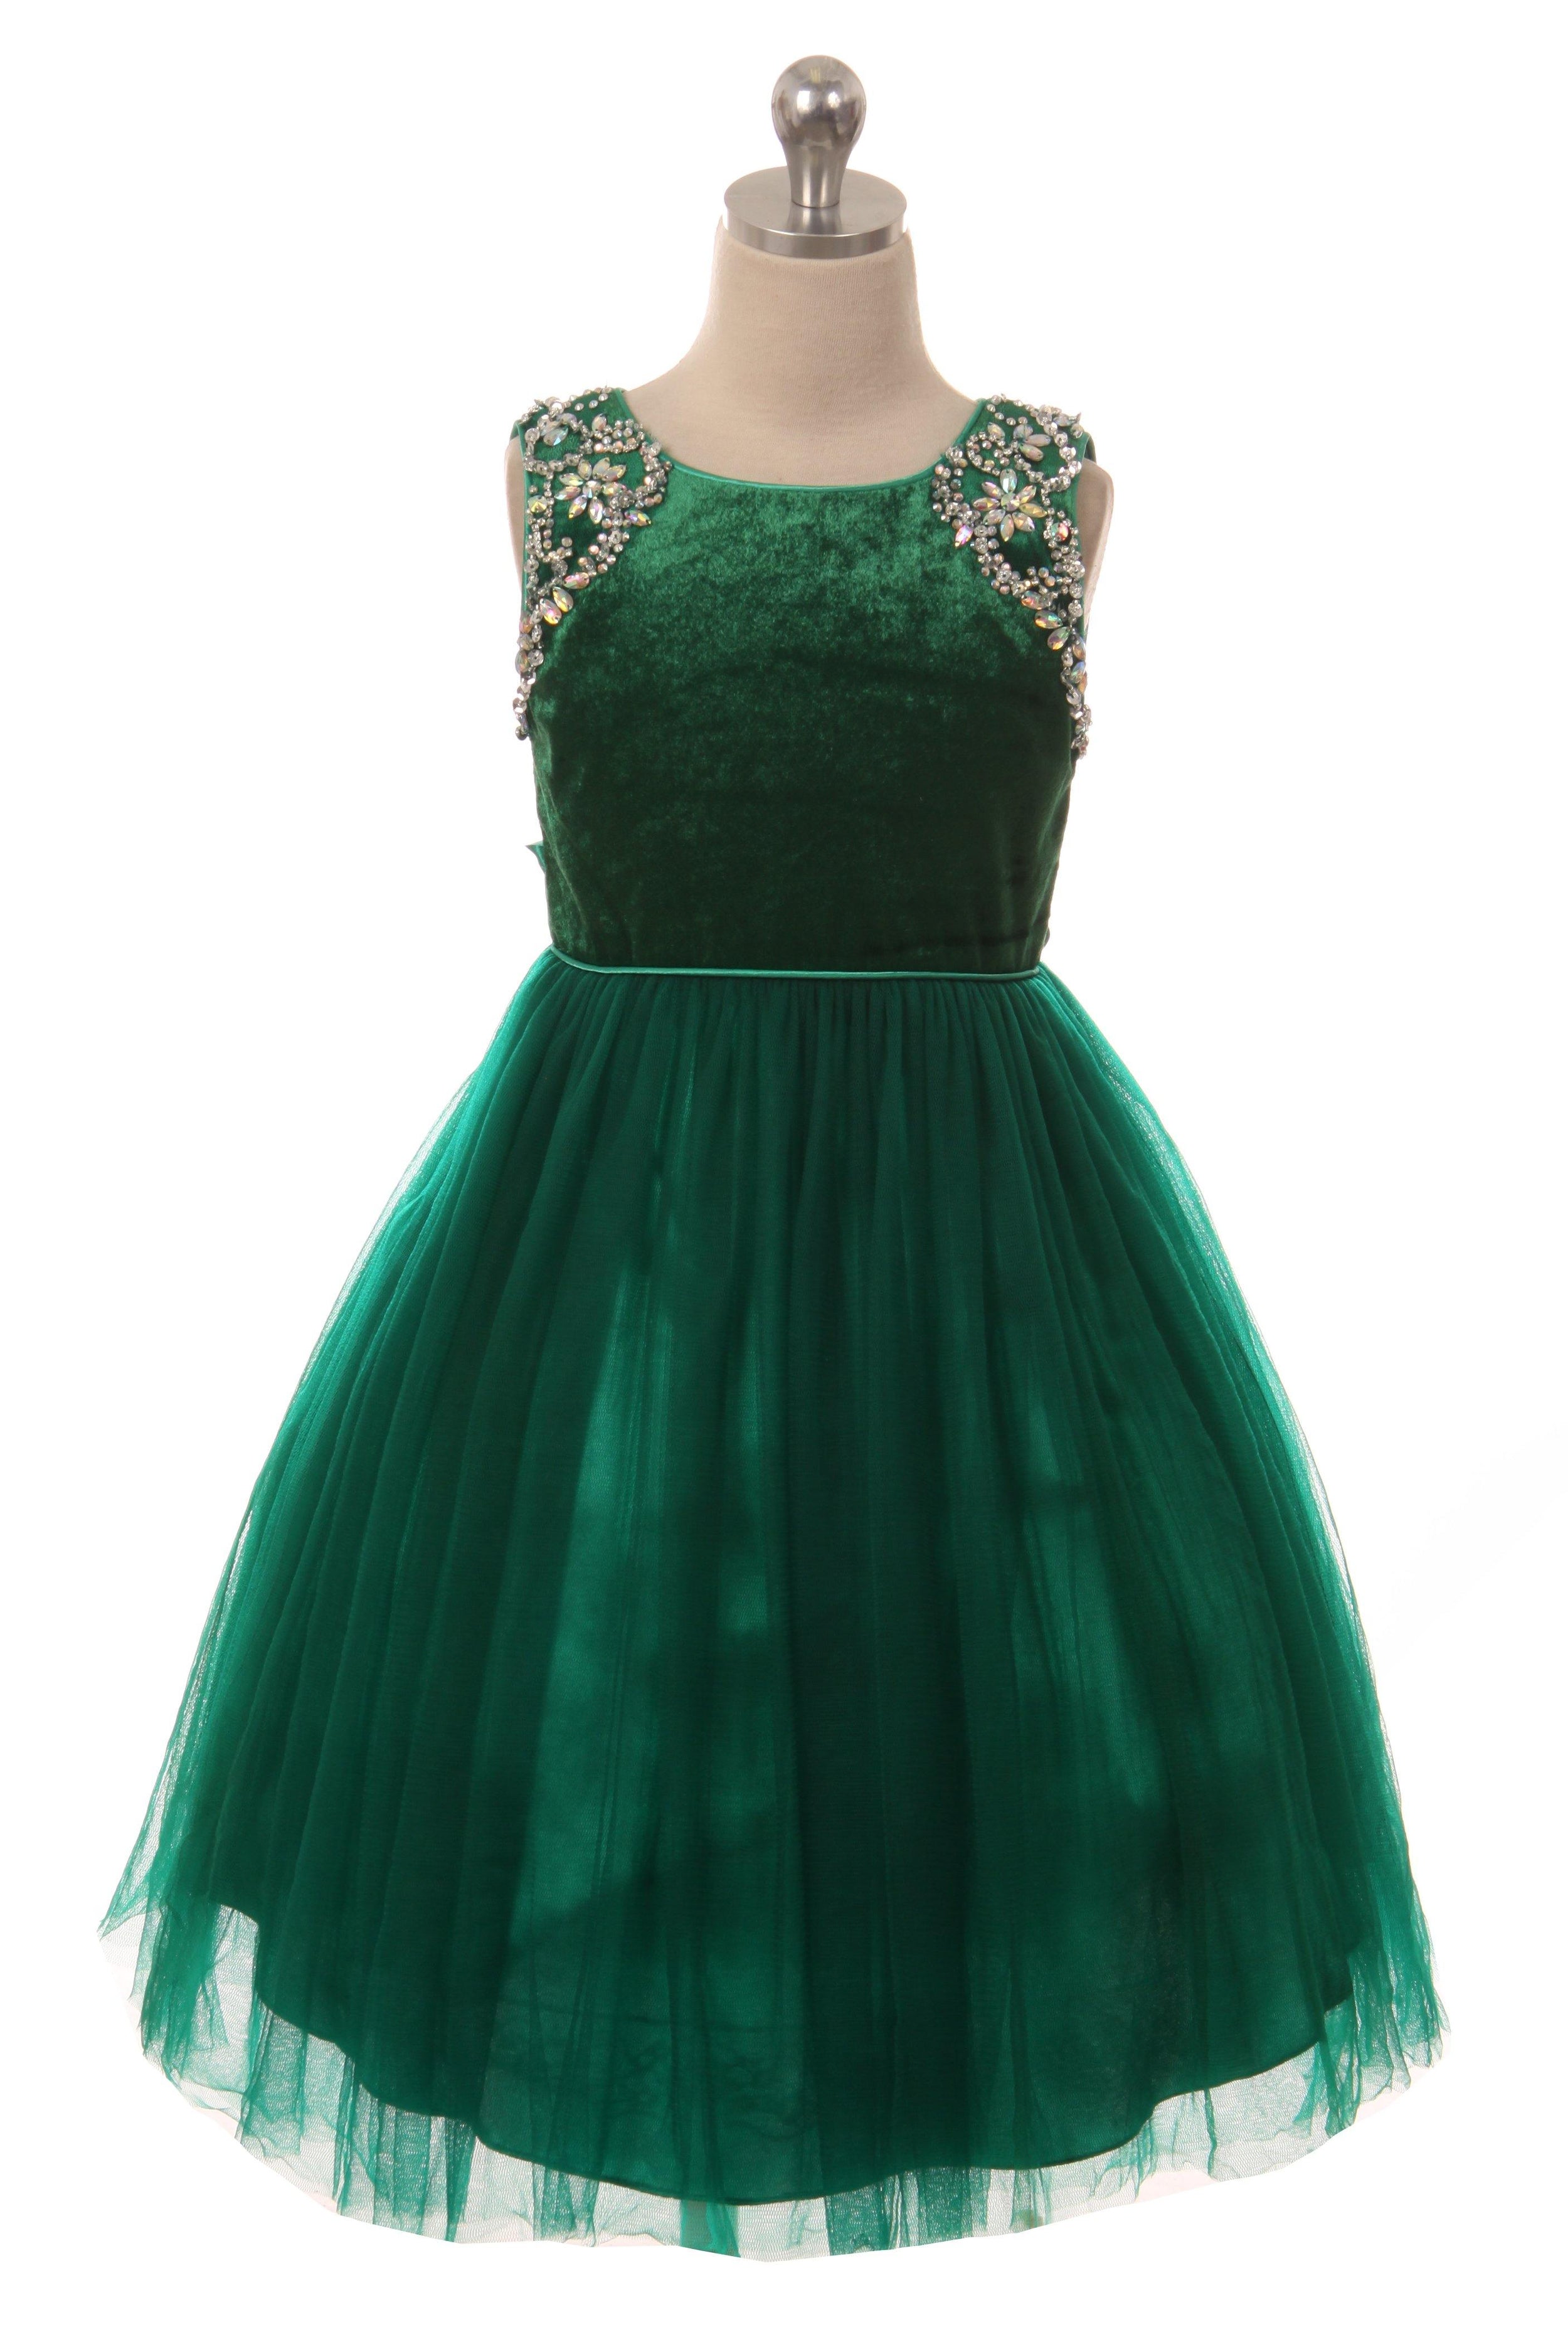 Beaded Velvet and Tulle Dress Flower Girl - The Dress Outlet Cinderella Couture